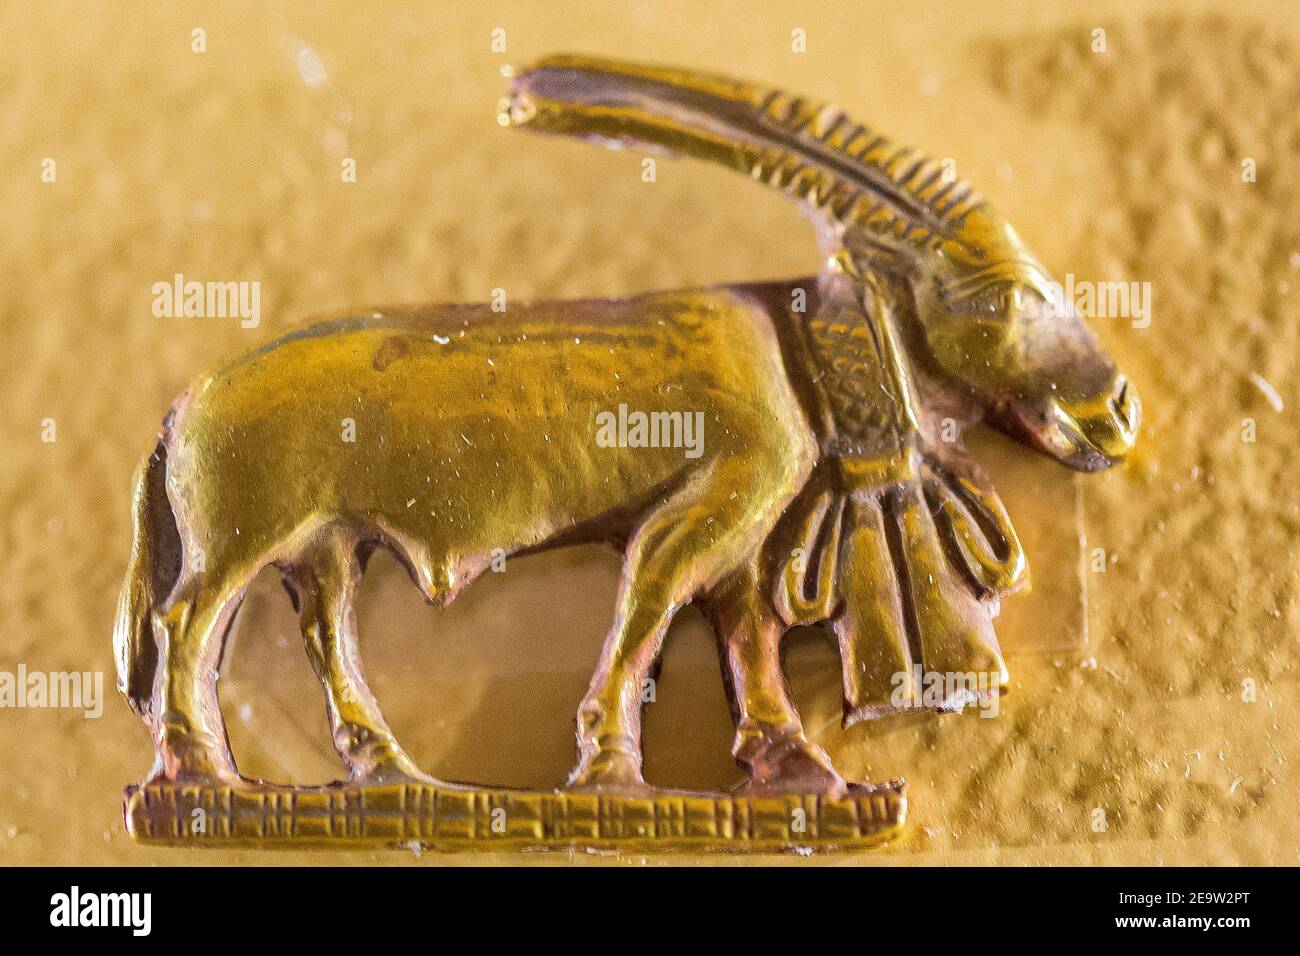 Egypt, Cairo, Egyptian Museum, gold amulet found  in a tomb of Nag el Deir, first Dynasty : An oryx. Stock Photo